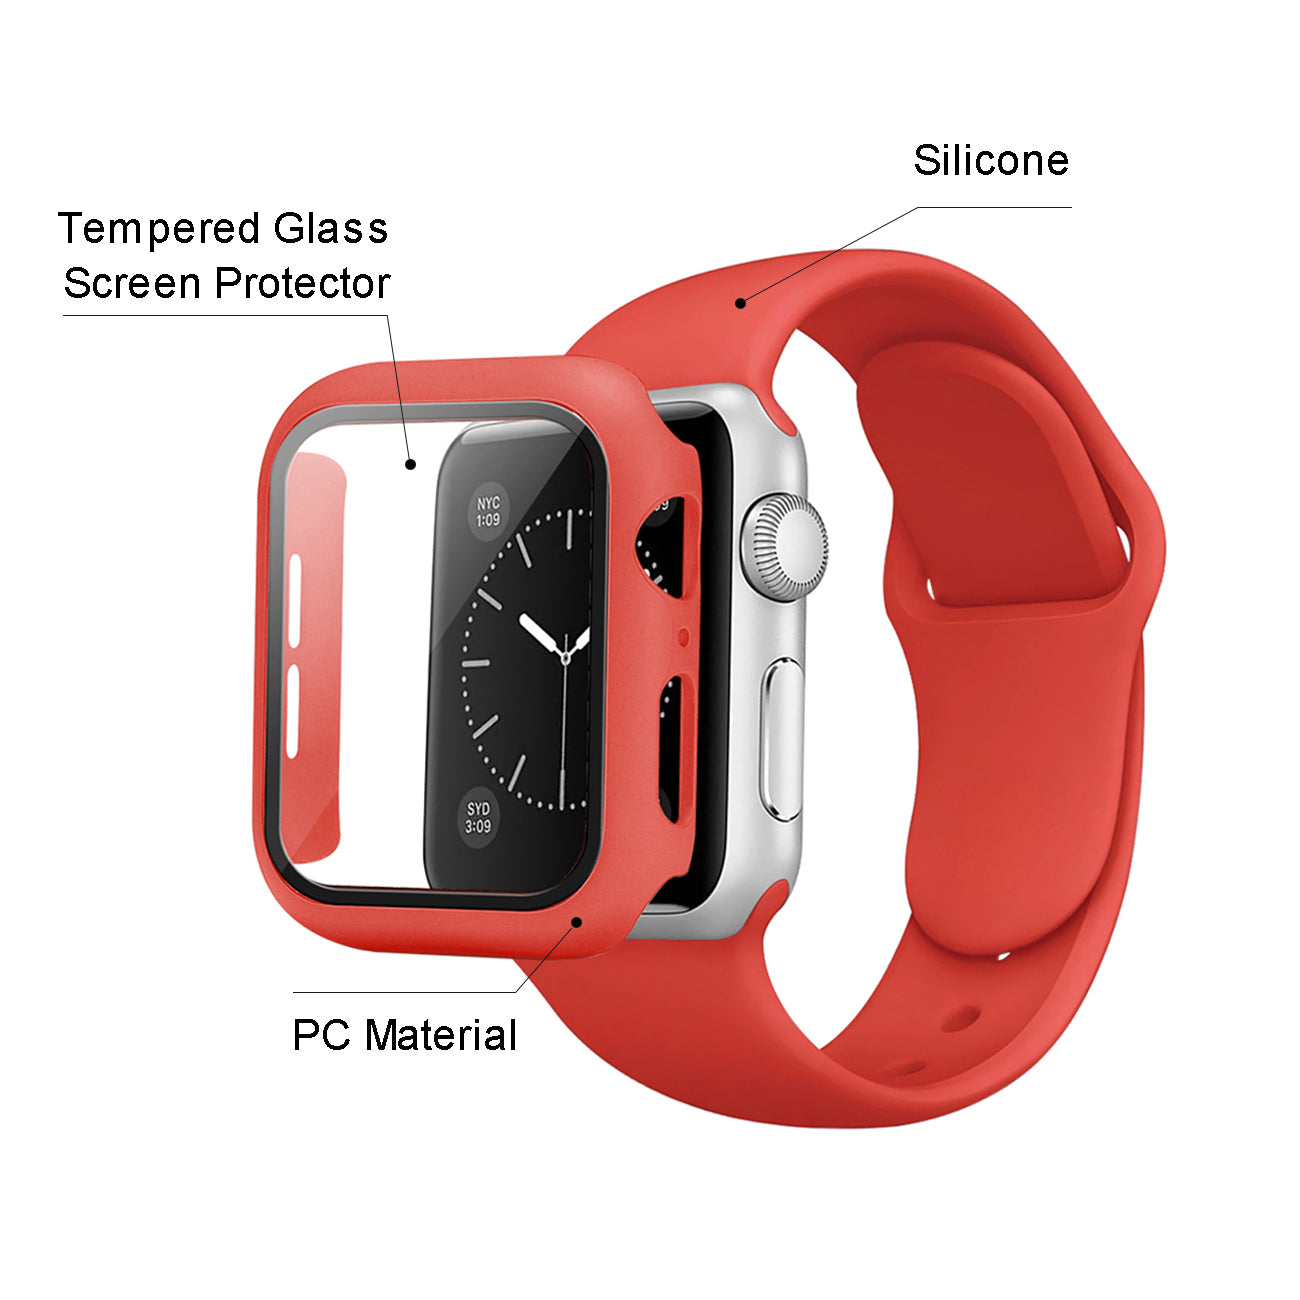 Watch Case PC With Glass Screen Protector, Silicone Watch Band Apple Watch 42mm Red Color